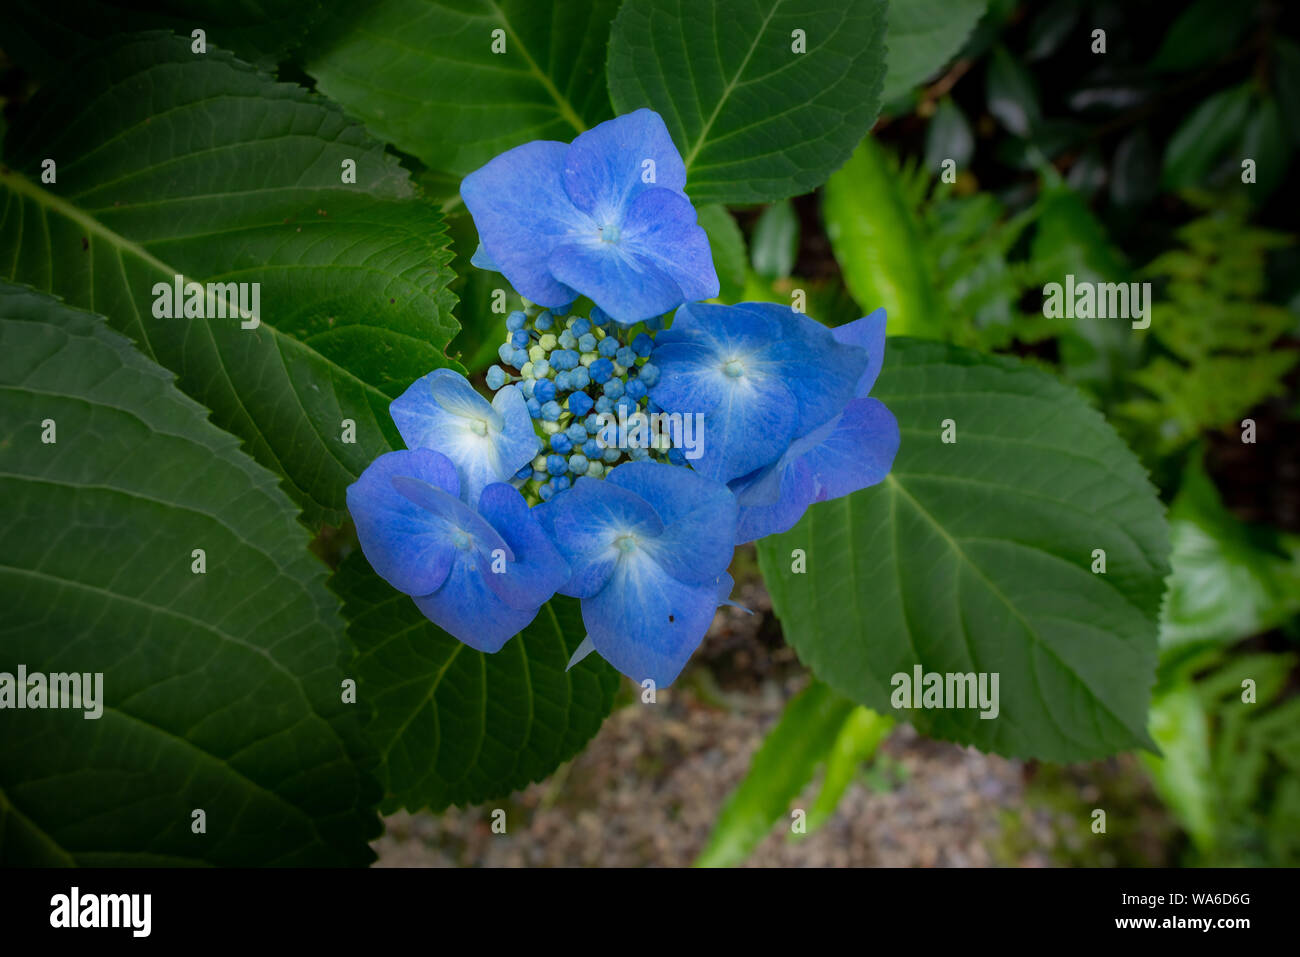 Close-up of a deep cobalt blue flower of an Hortensia  with leaves and blurred green background Stock Photo